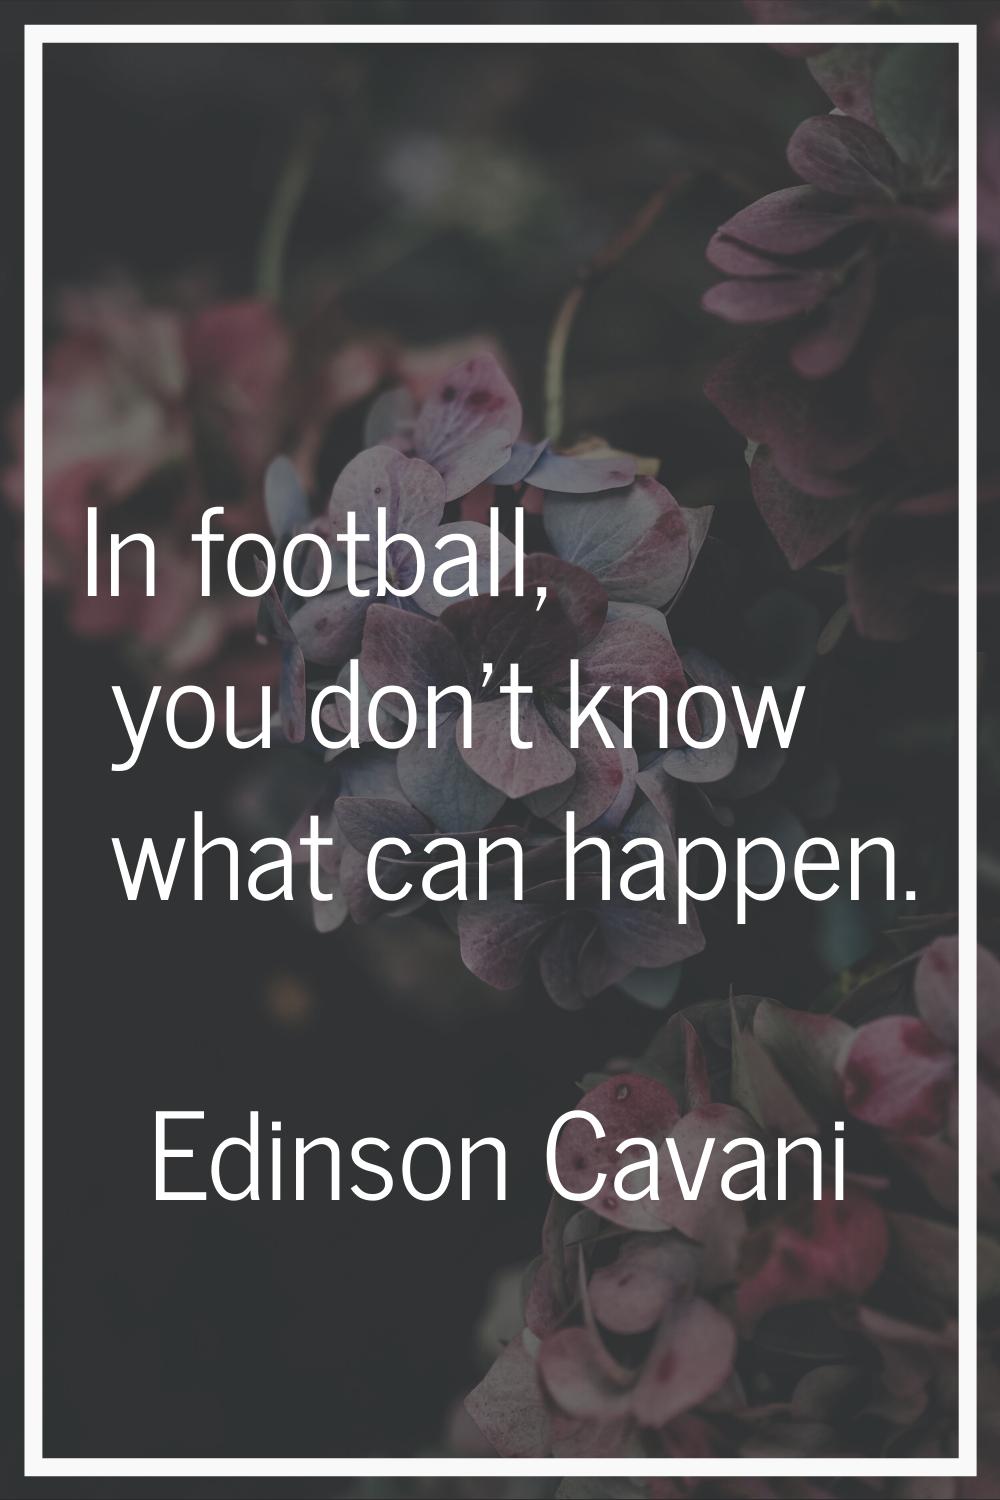 In football, you don't know what can happen.